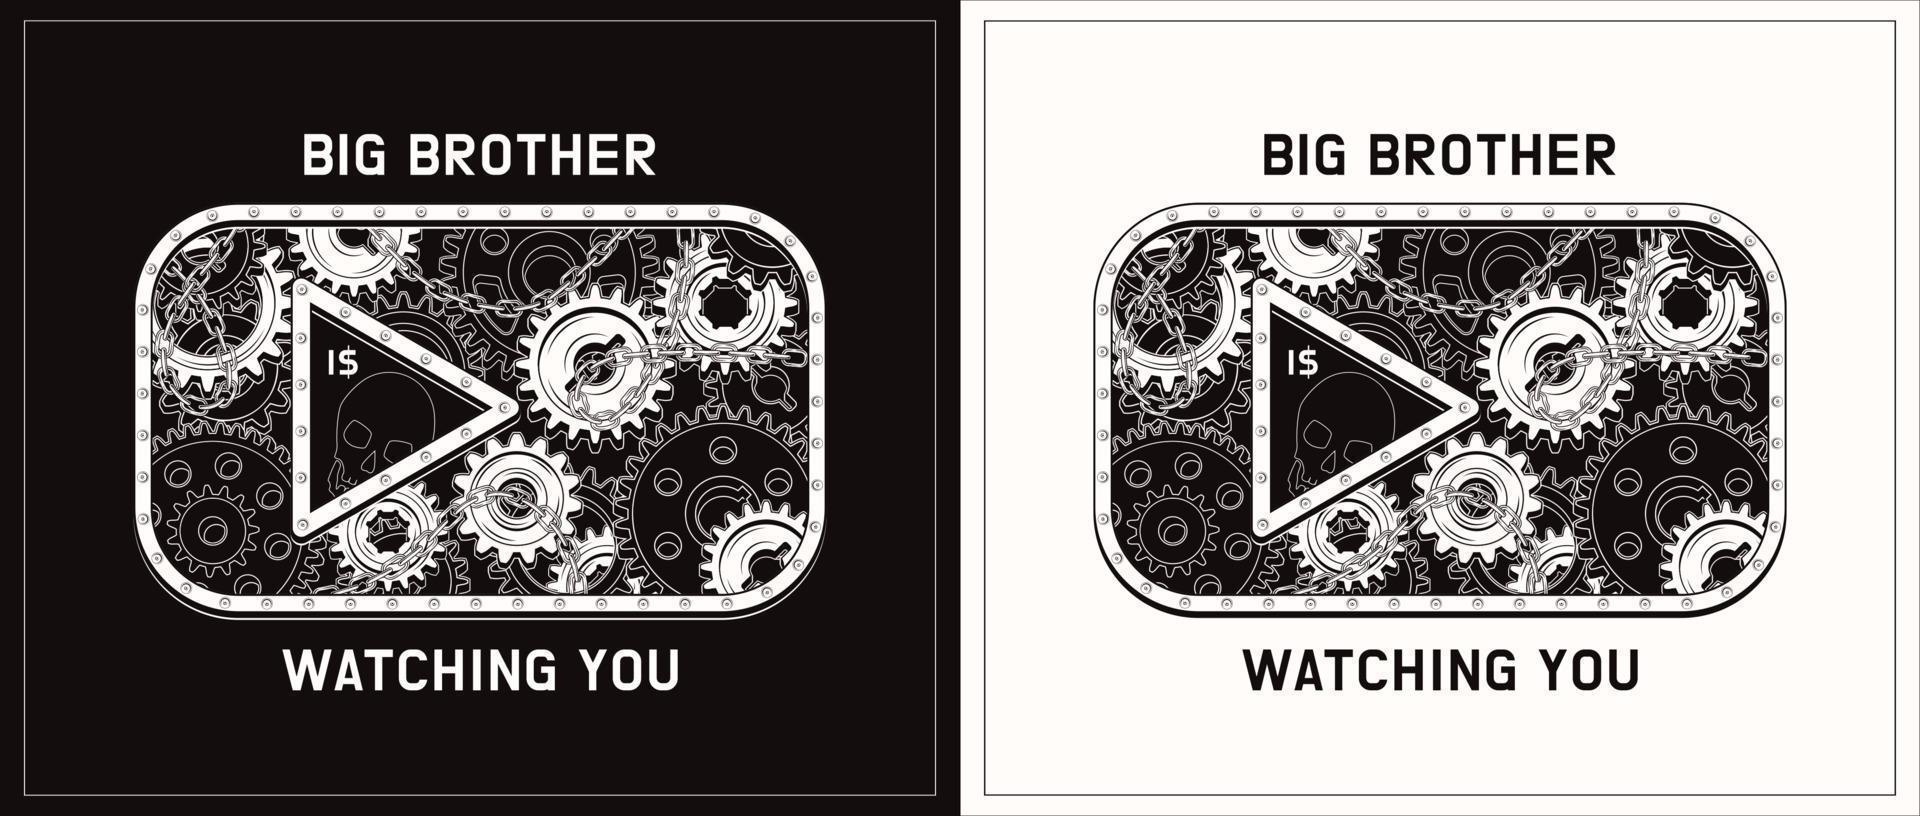 Video play icon of social media in vintage style with gears, metal rail, rivets, text. Big brother is watching you. Concept of global supervision through internet, social media vector